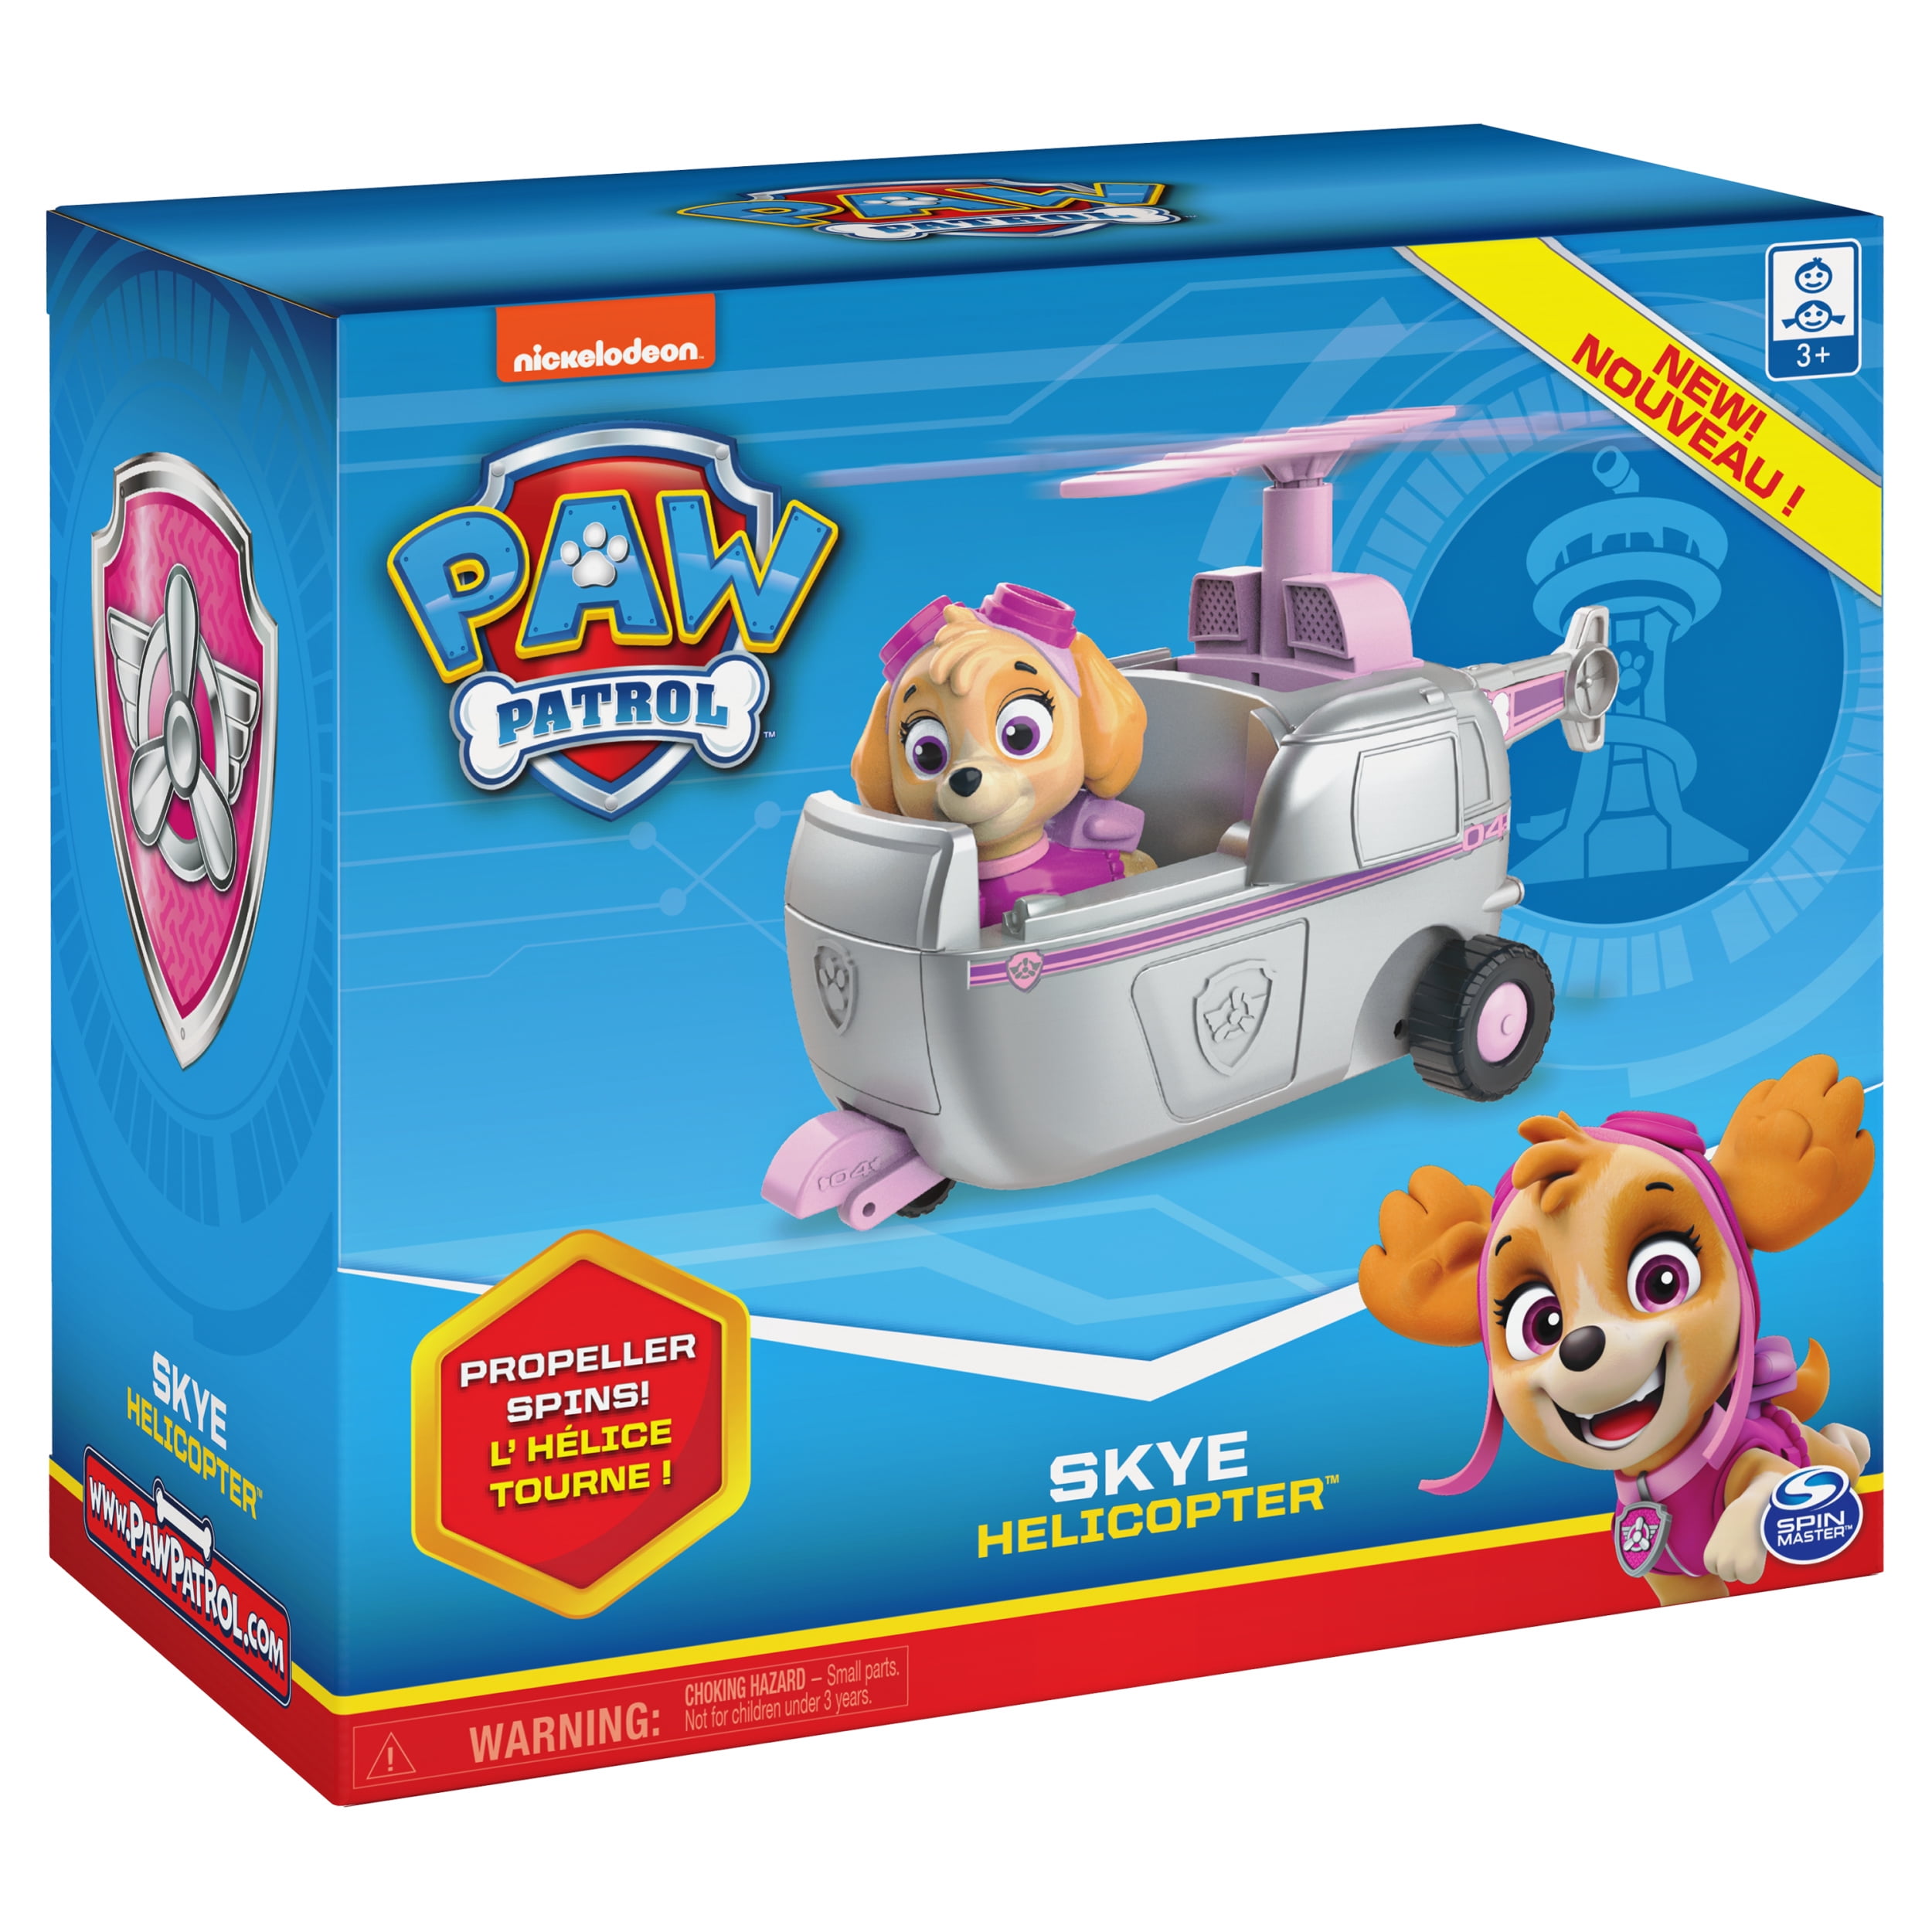 Paw Patrol Spin Master 20114324 Skye Helicopter 